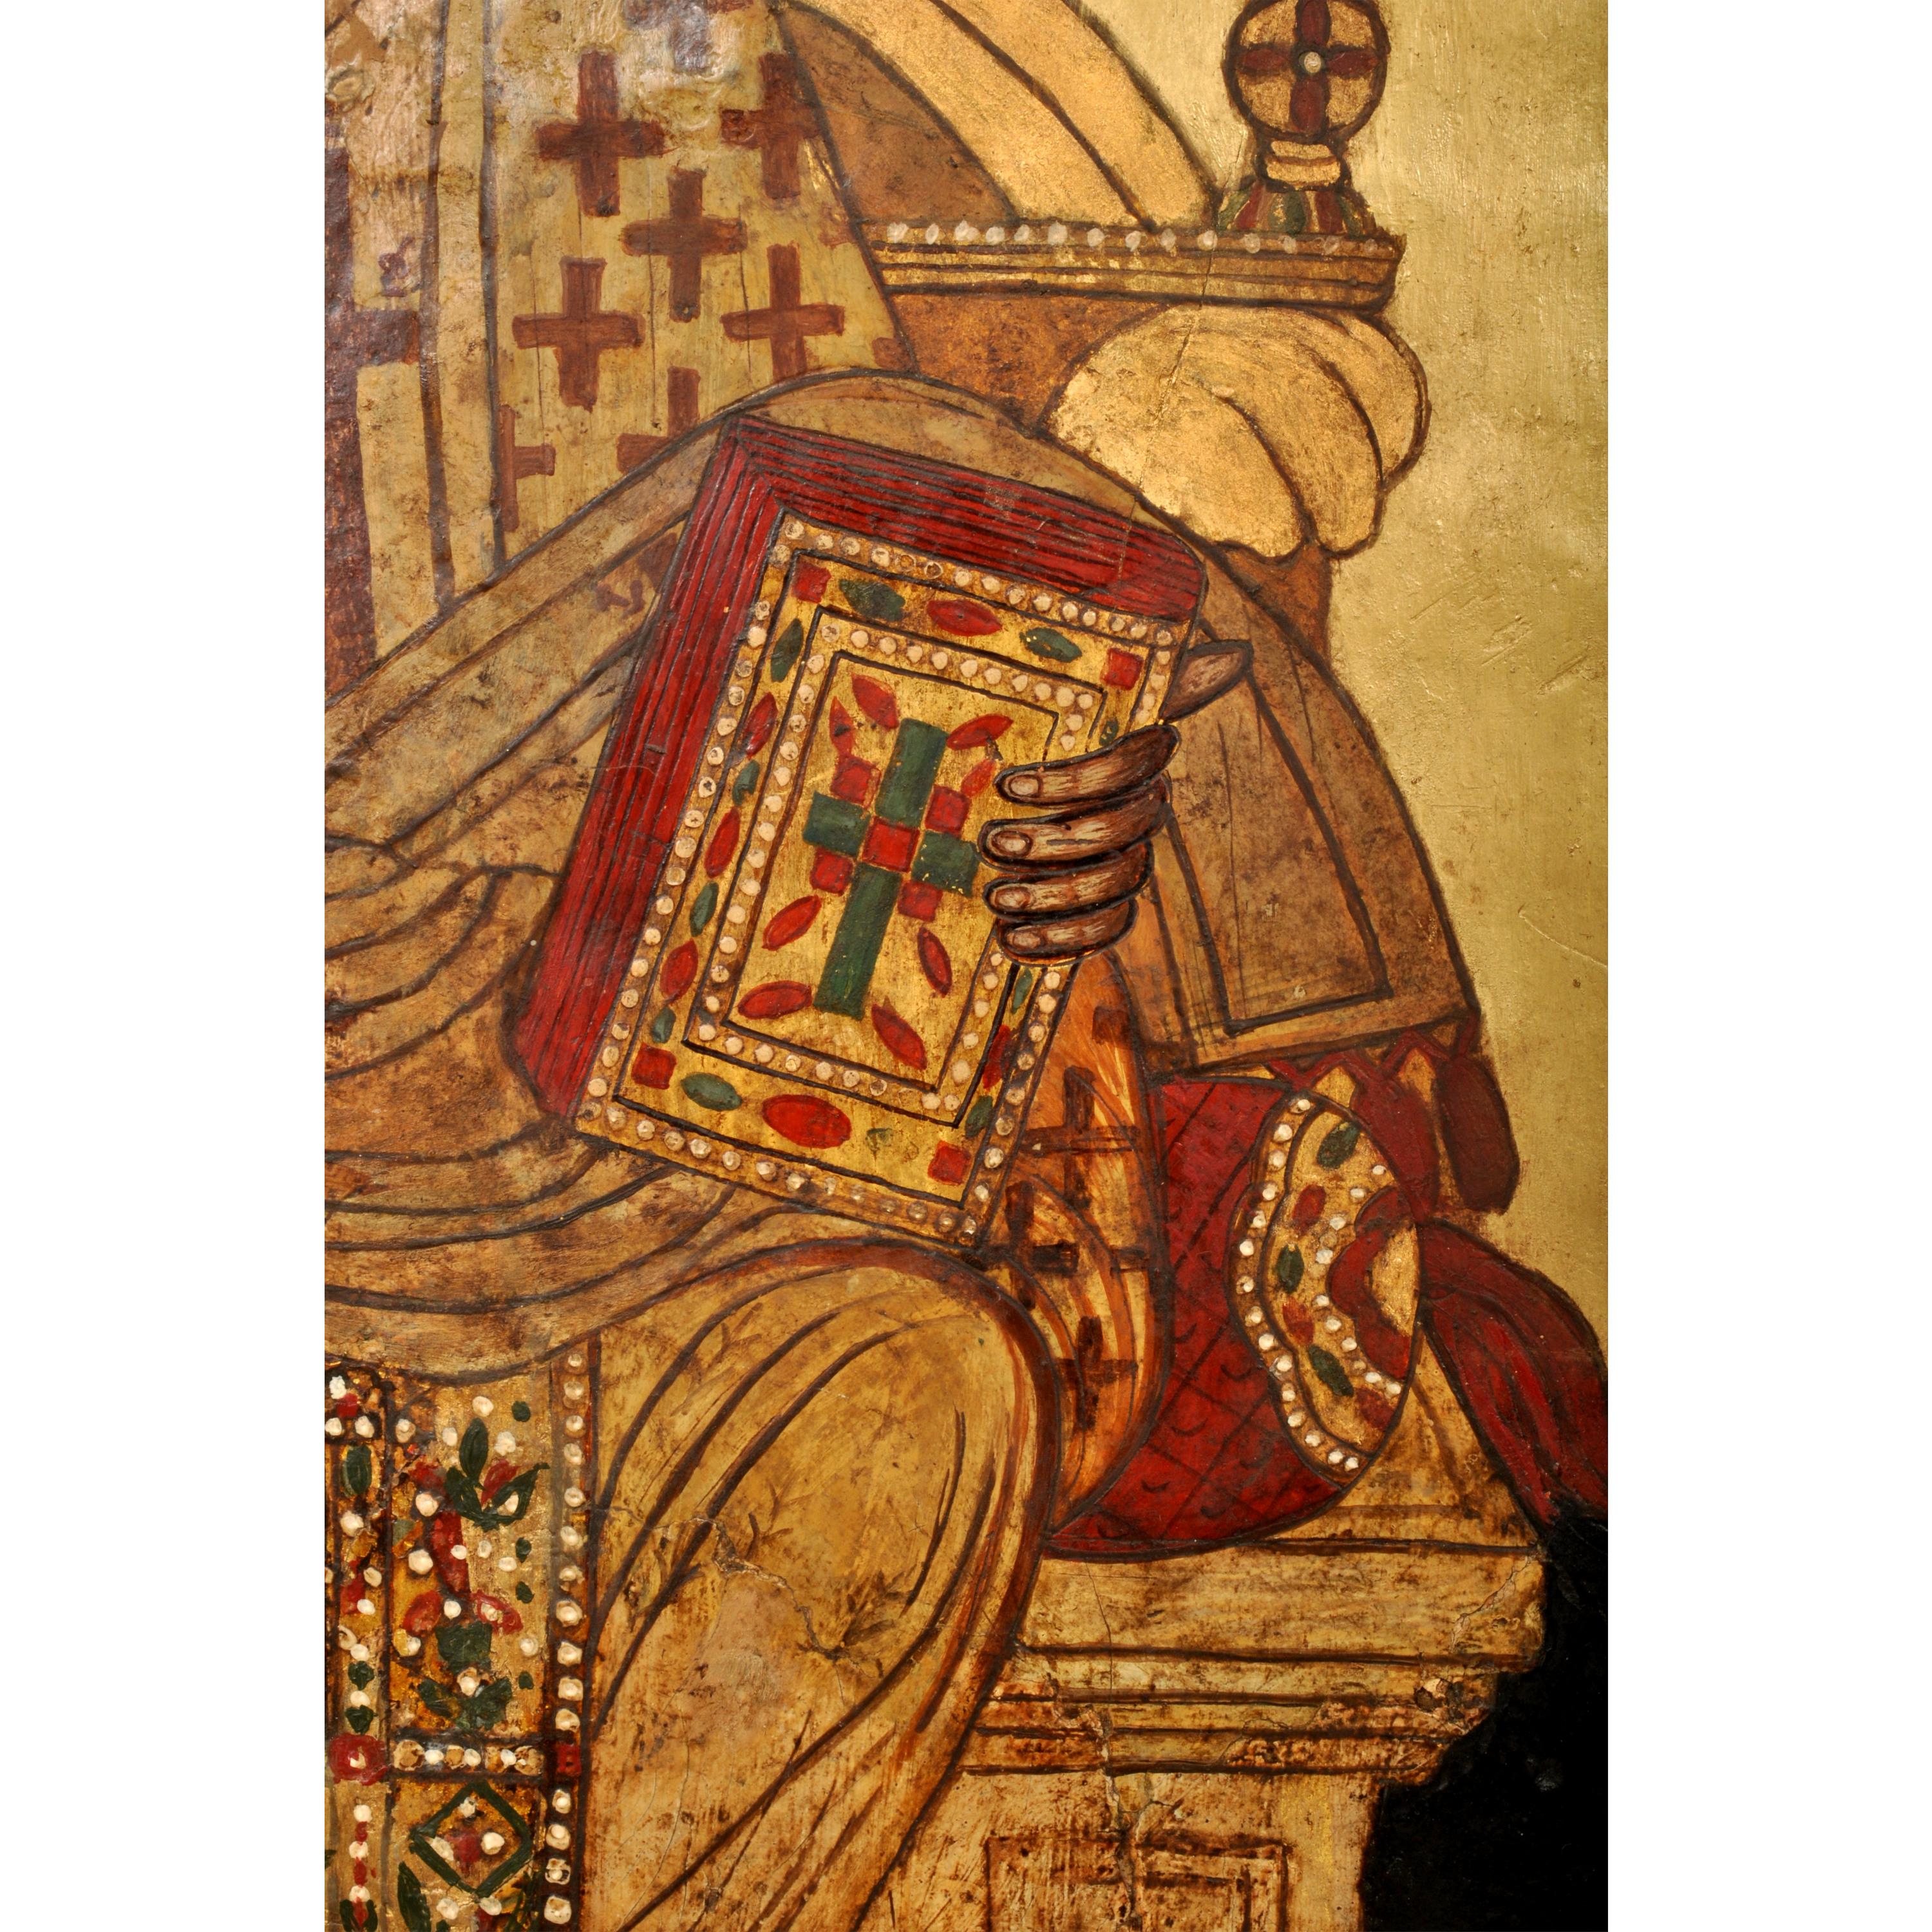 A fine & rare 17th century Greek Orthodox Icon, Saint Athanasios (Athanasius), circa 1650.
The icon depicting Saint Athanasios enthroned in  the Byzantine style and painted with egg tempera and heightened with 24 karat gold leaf. This icon was